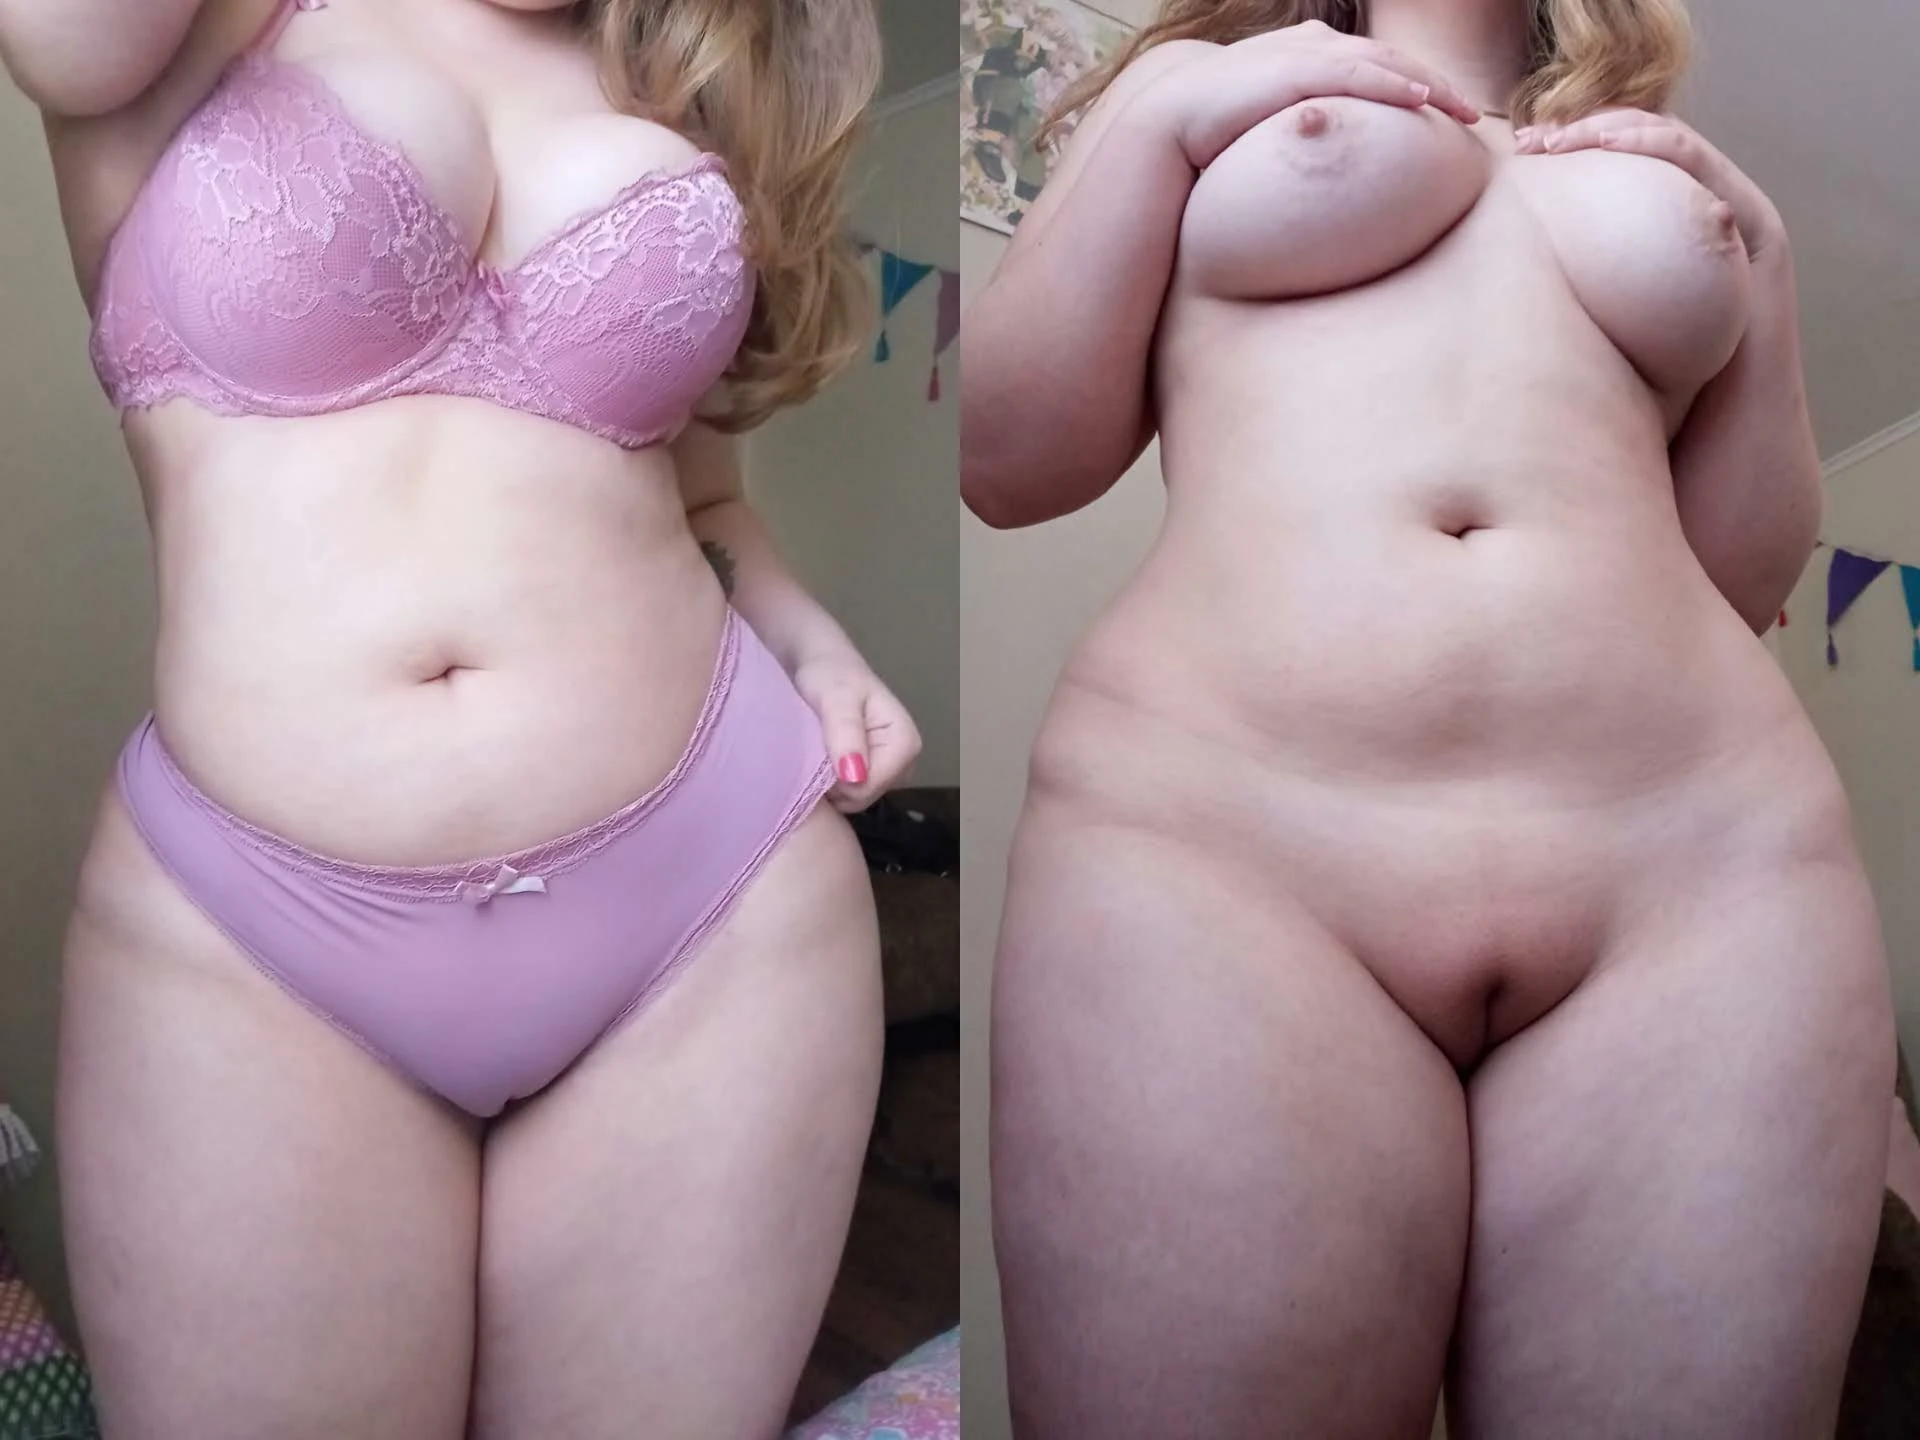 I love my pink set but I think I look better naked